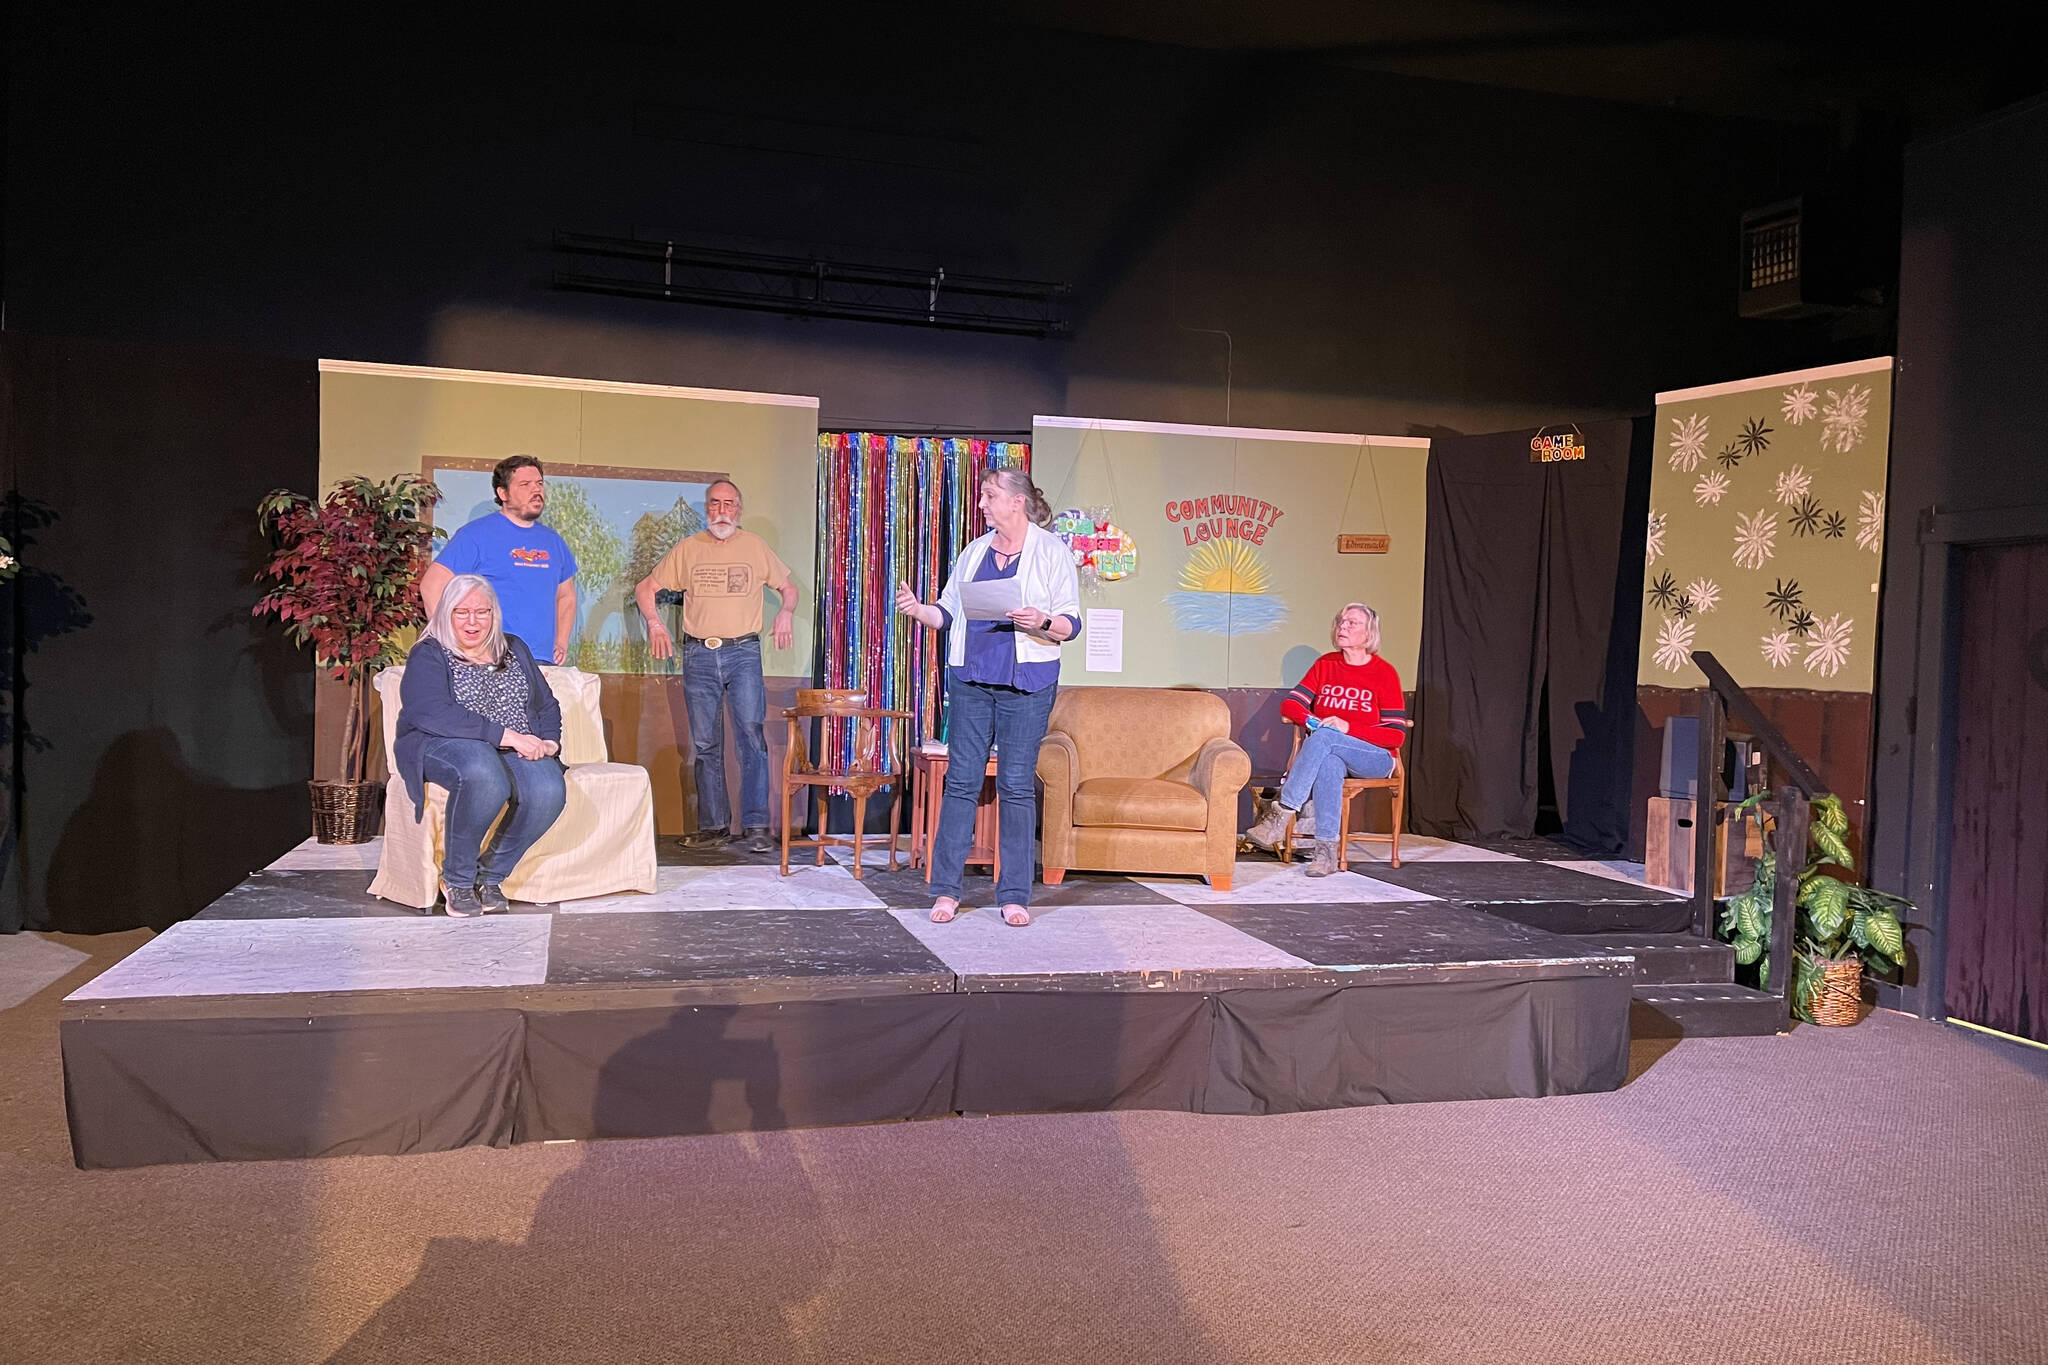 From left: Yvette Tappana, Rob Lewis, Allen Auxier, Donna Shirnberg and Terri Zopf-Schoessler perform in the Kenai Performers production “The Old People Are Revolting” on Tuesday, Jan. 11, 2022, in Soldotna, Alaska. (Photo courtesy Donna Shirnberg)